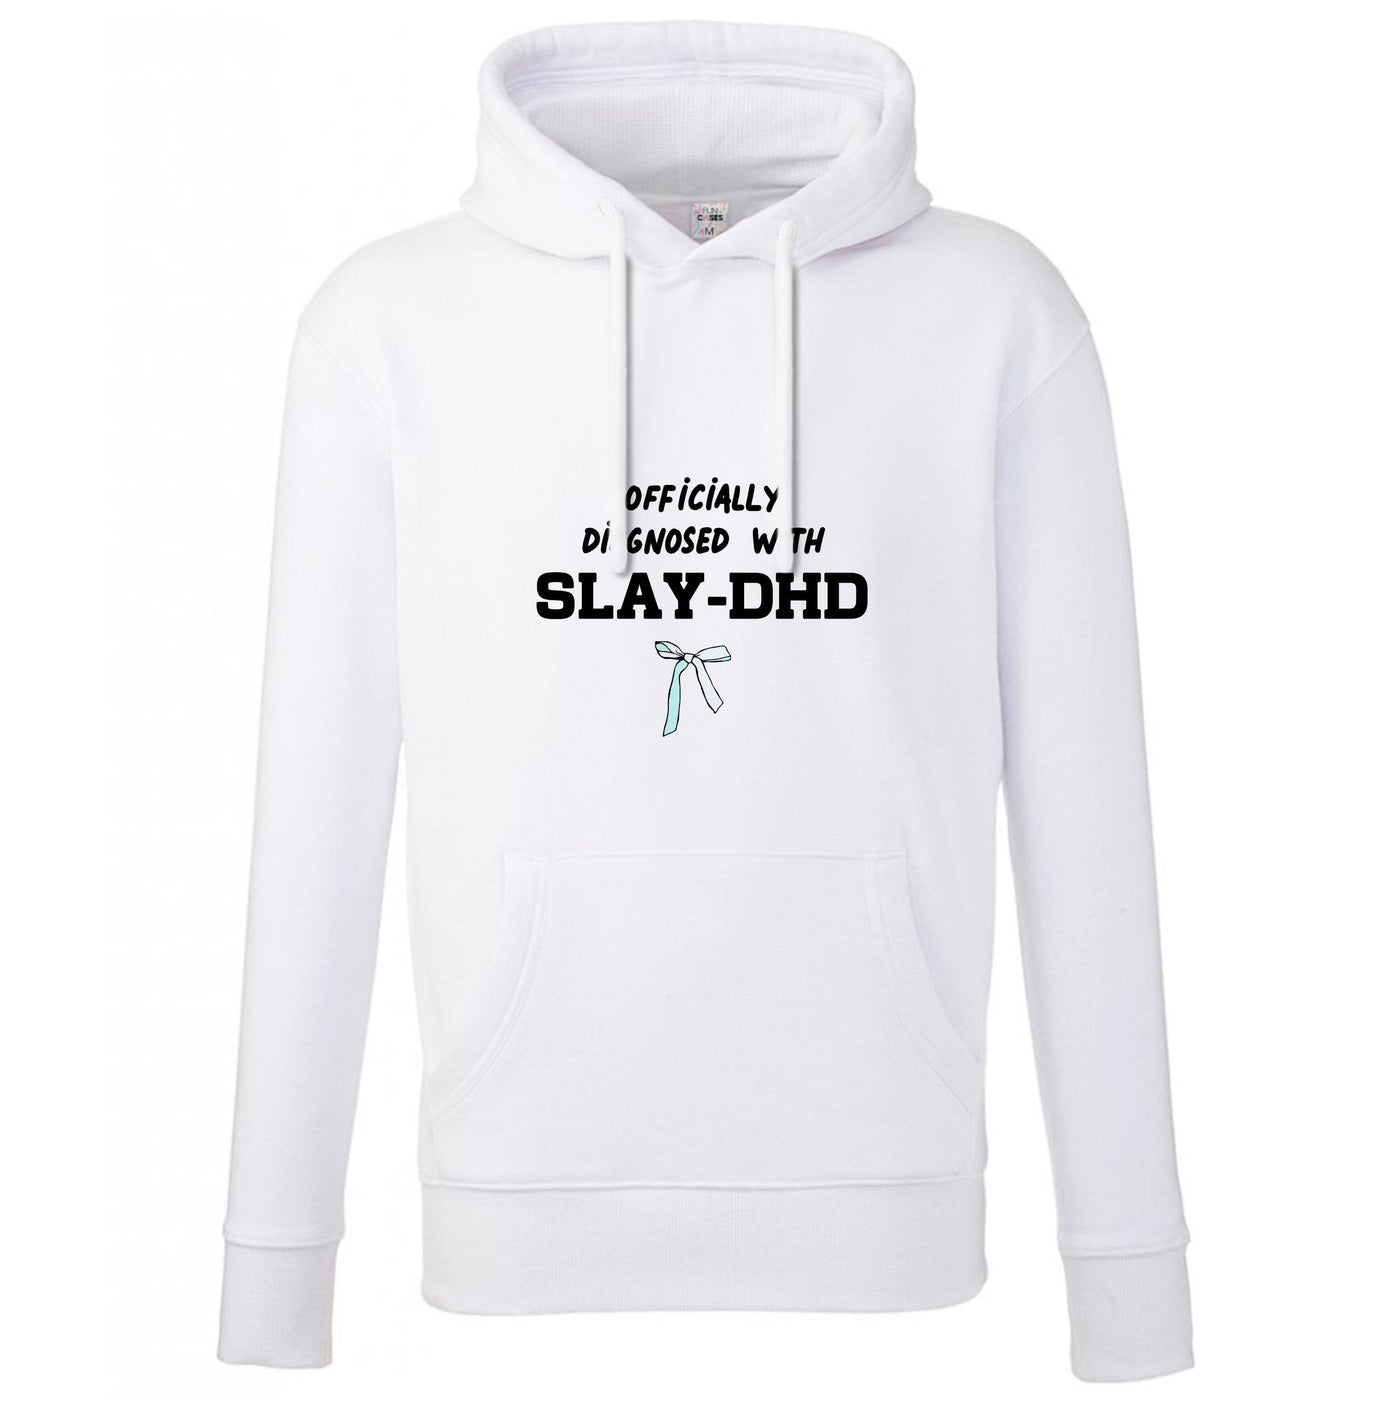 Officially Diagnosed With Slay-DHD - TikTok Trends Hoodie